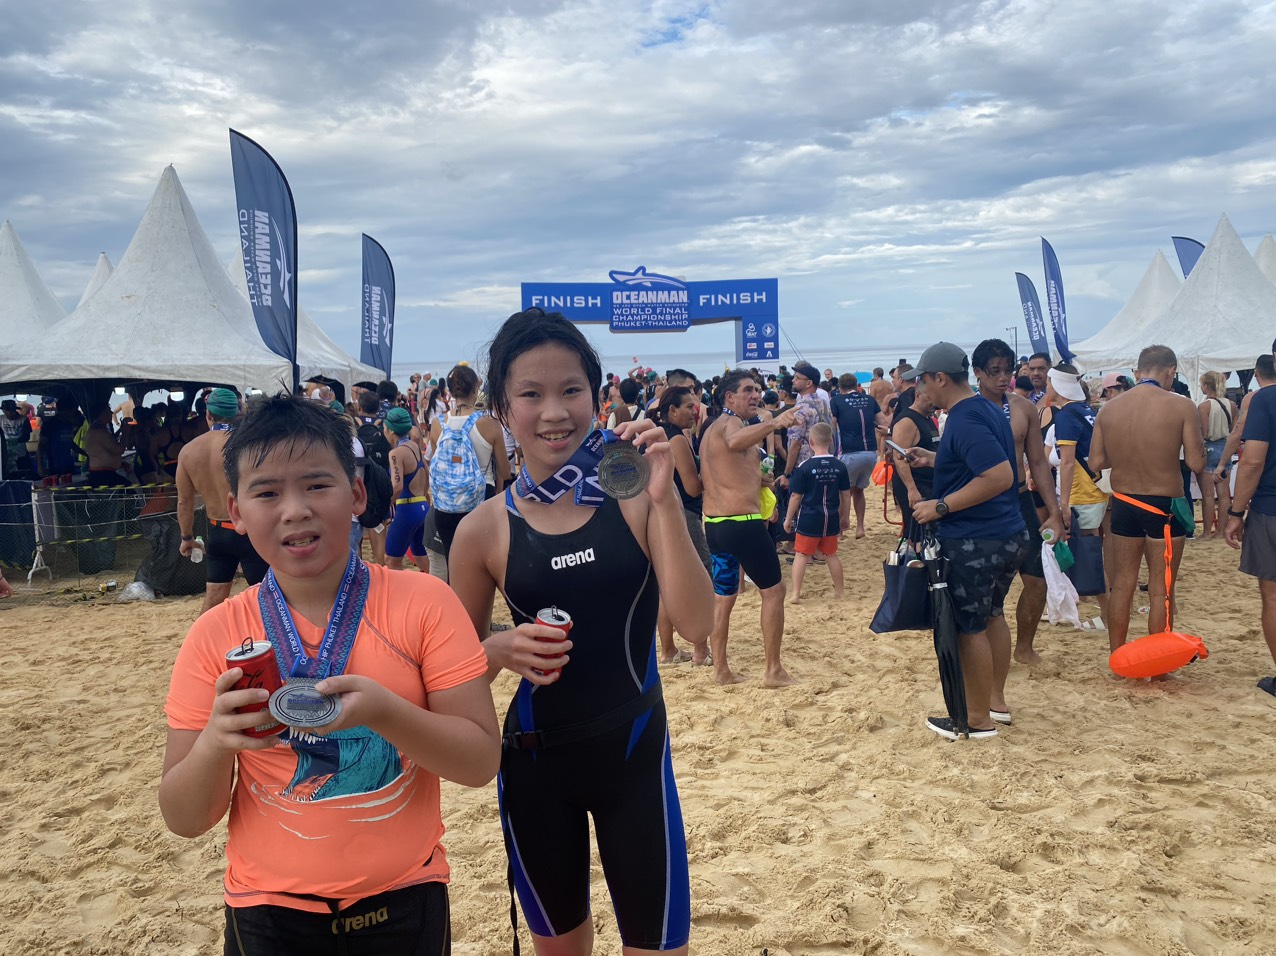 Our young swimmers of BVIS, Angie (Bao Chau) and Vuong Khoi continue to achieve high performance at The Oceanman International Swimming Championship! - Angie and Vuong Khoi achieve high performance at The Oceanman International Swimming Championship